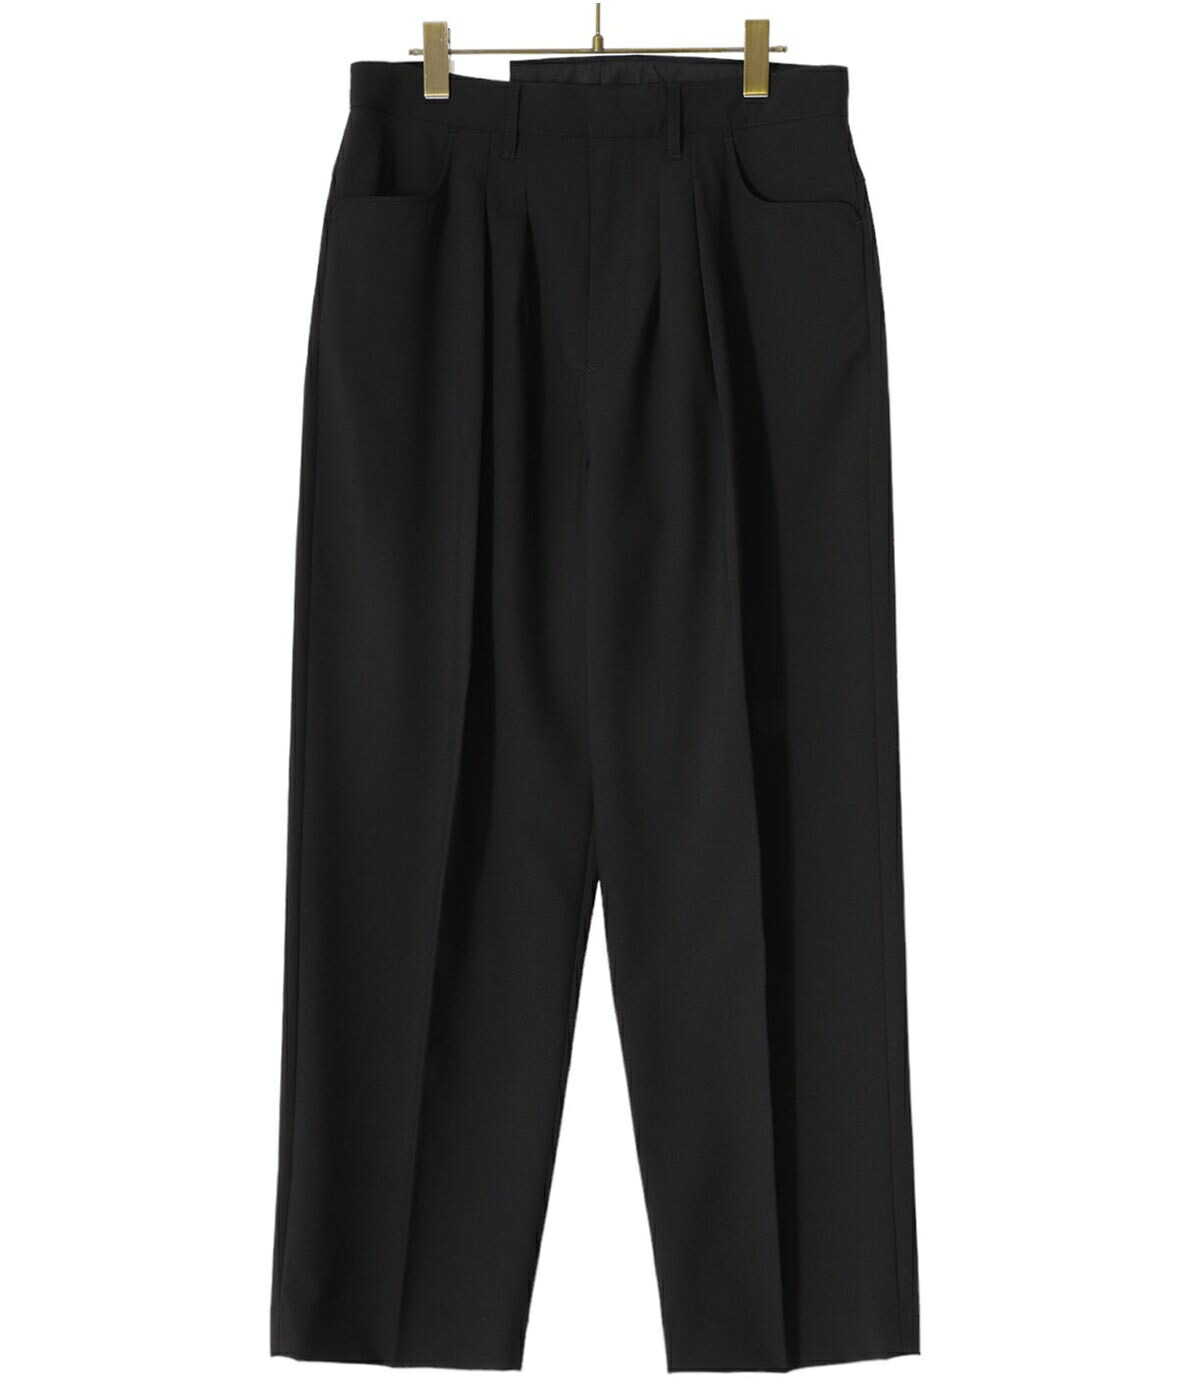 FARAH / ファーラー ： Two Tuck Wide Tapered Pants ： FR04...